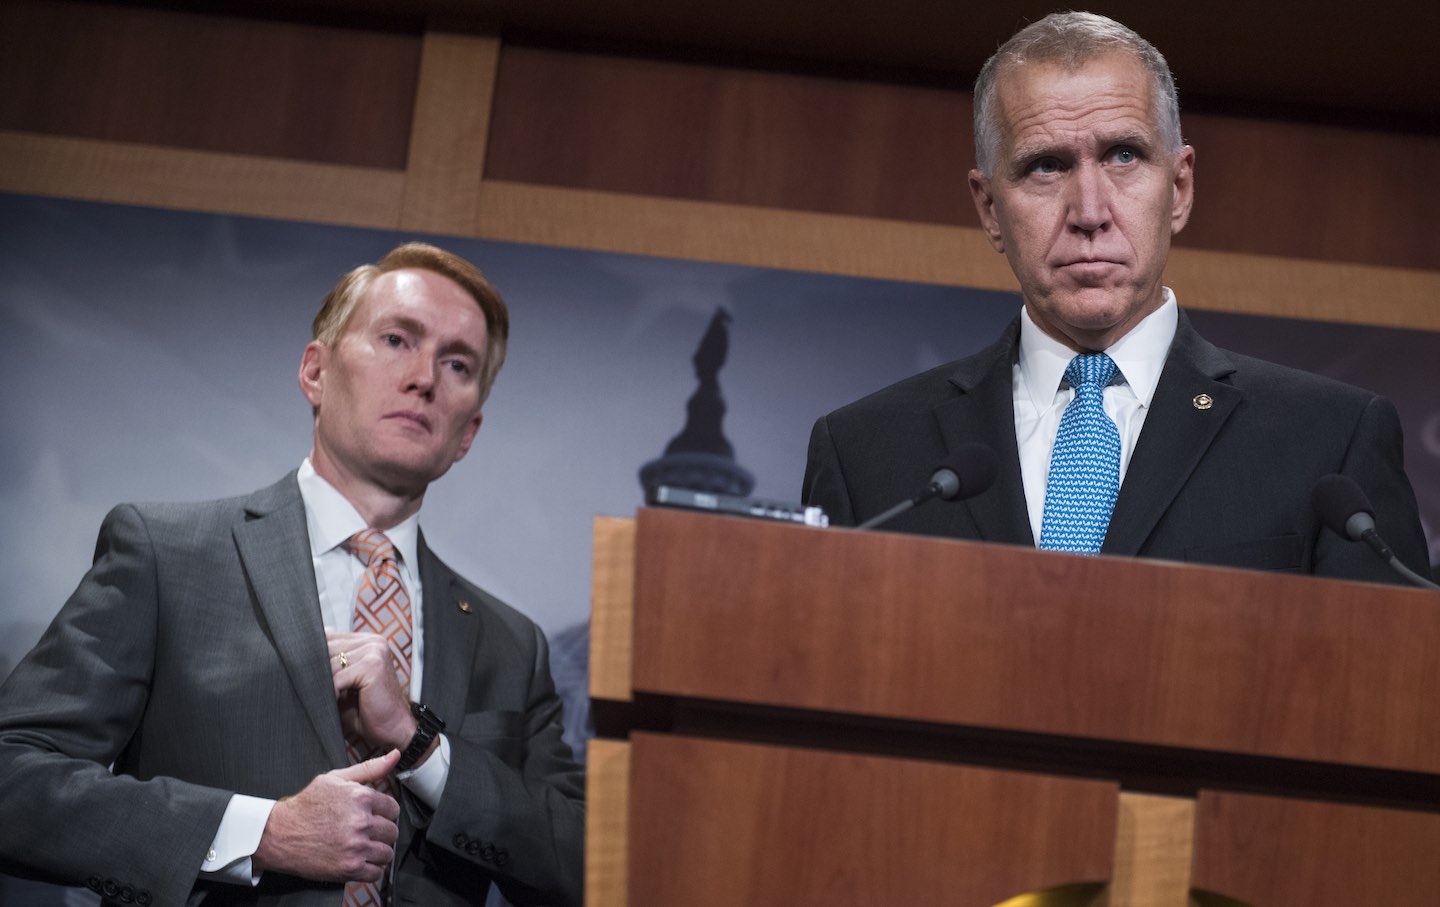 From left, Senators James Lankford (R-Okla.), Thom Tillis (R-N.C.), and Orrin Hatch (R-Utah) hold a news conference in the Capitol on the Succeed Act, which would create a pathway to citizenship for undocumented immigrants on September 25, 2017.